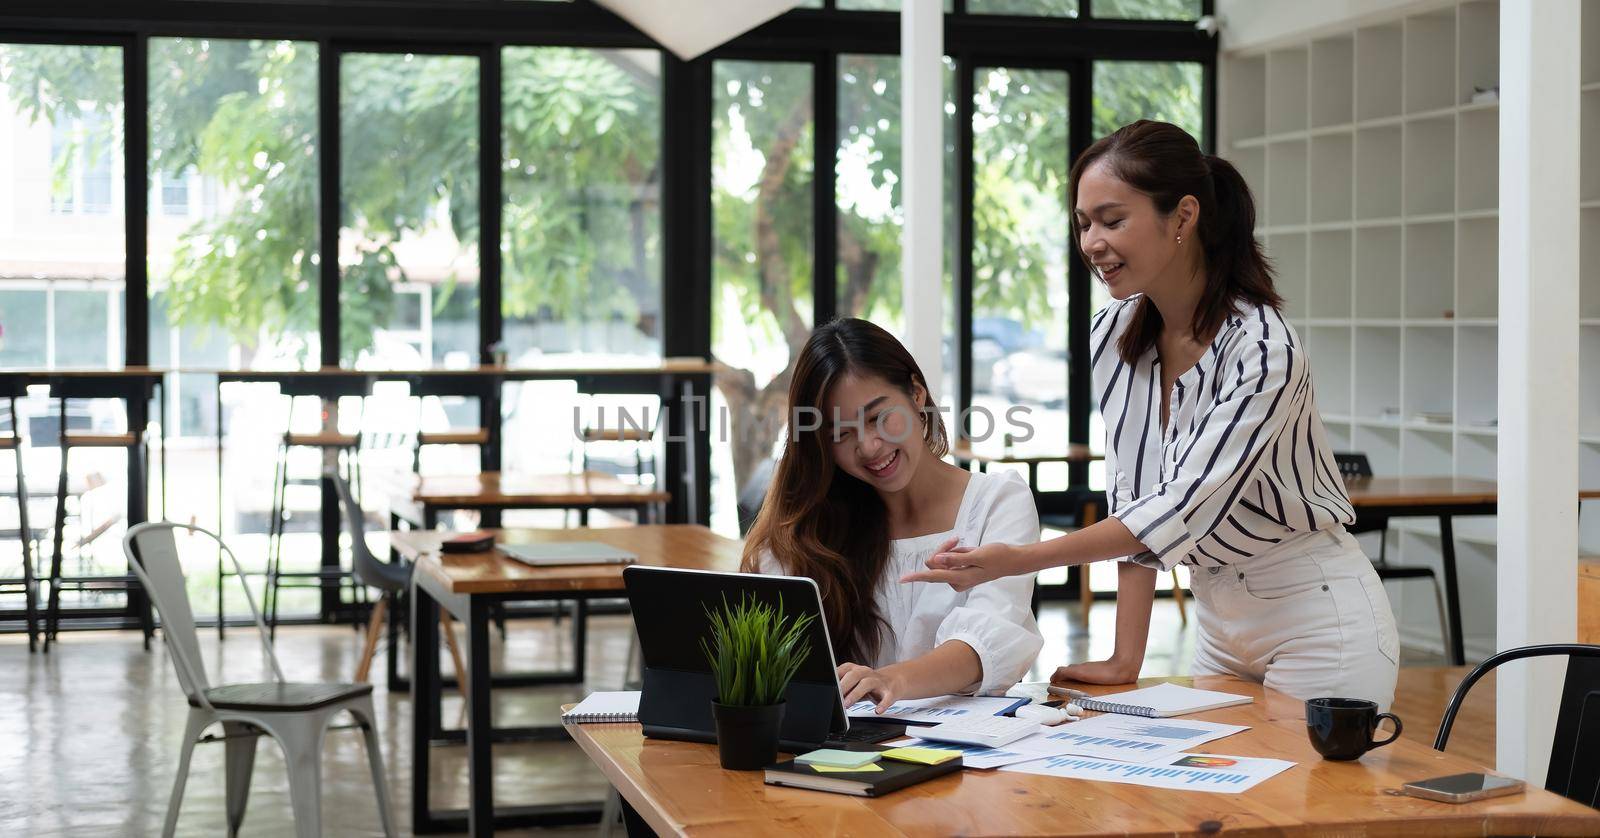 Friendly female colleagues having good relationships, pleasant conversation at workplace, smiling young asian woman listen talkative coworker, discussing new project, talking in office.